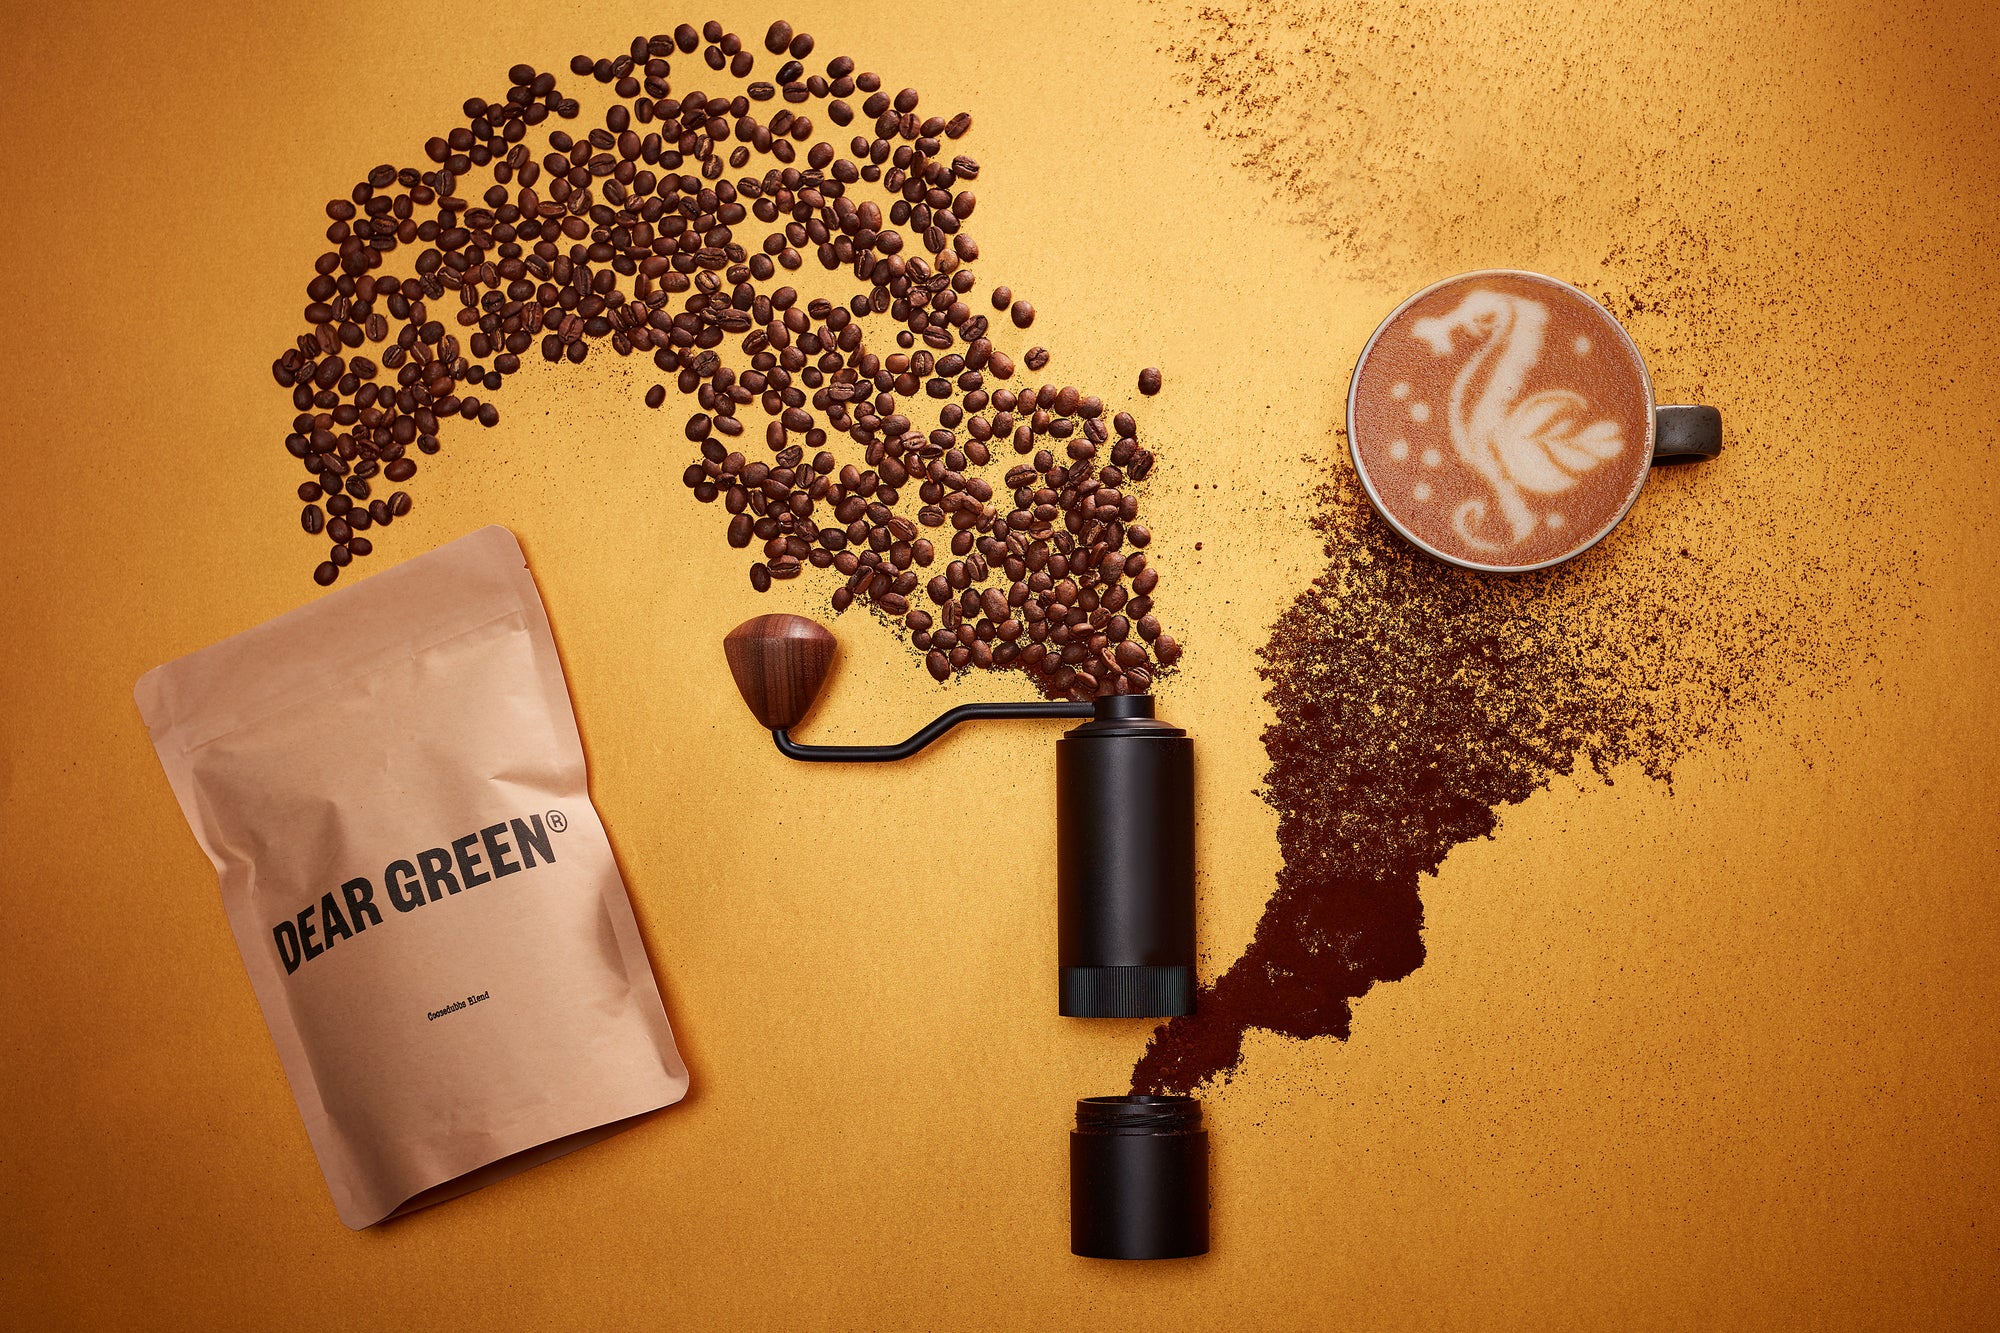 Flatlay of a bag of Dear Green Coffee beans with loose beans scattered decoratively alongside a coffee grinder and a latte with dragon latte art. The composition is on a warm yellow background.